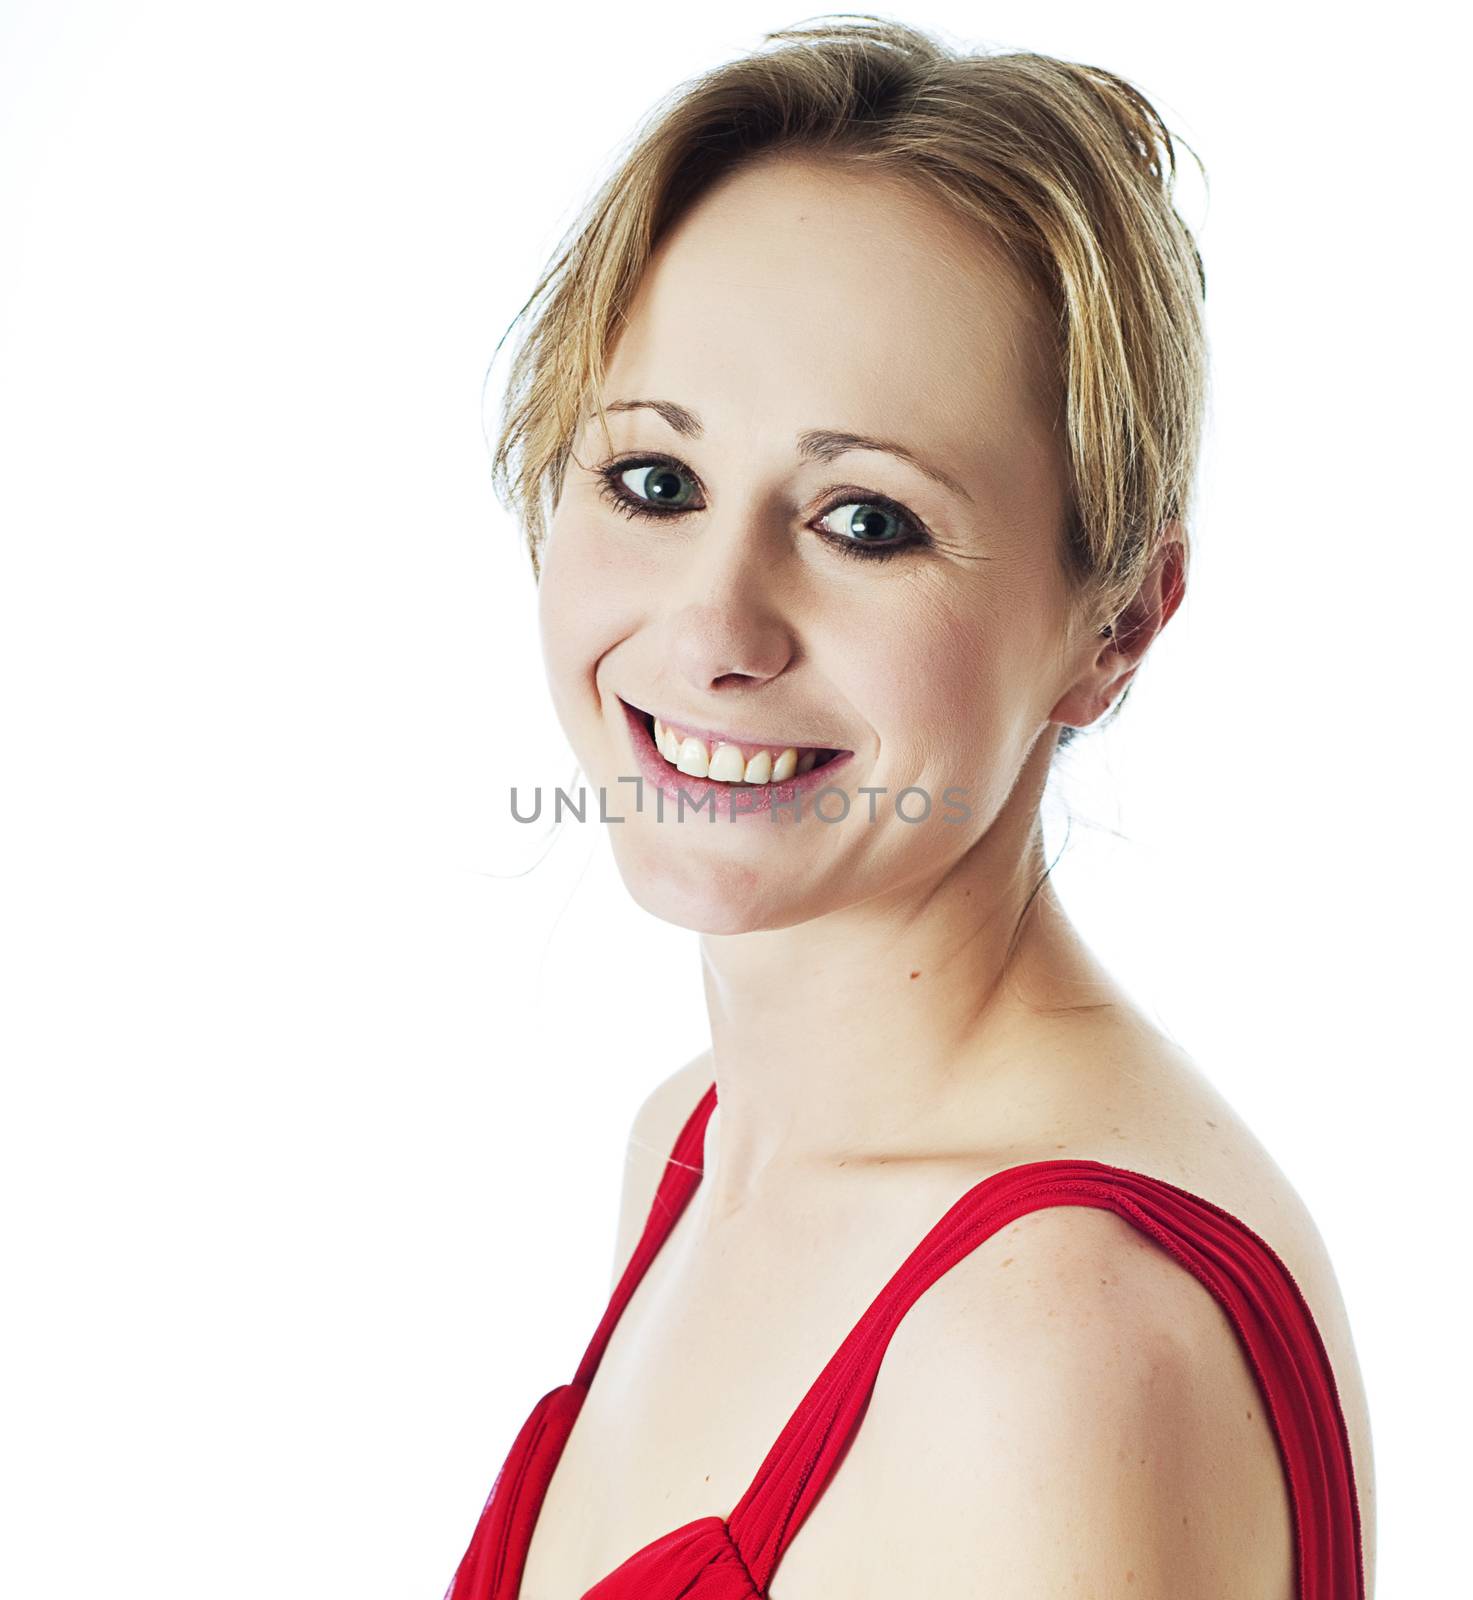 Head shot of a sexy young woman wearing red against a white background.